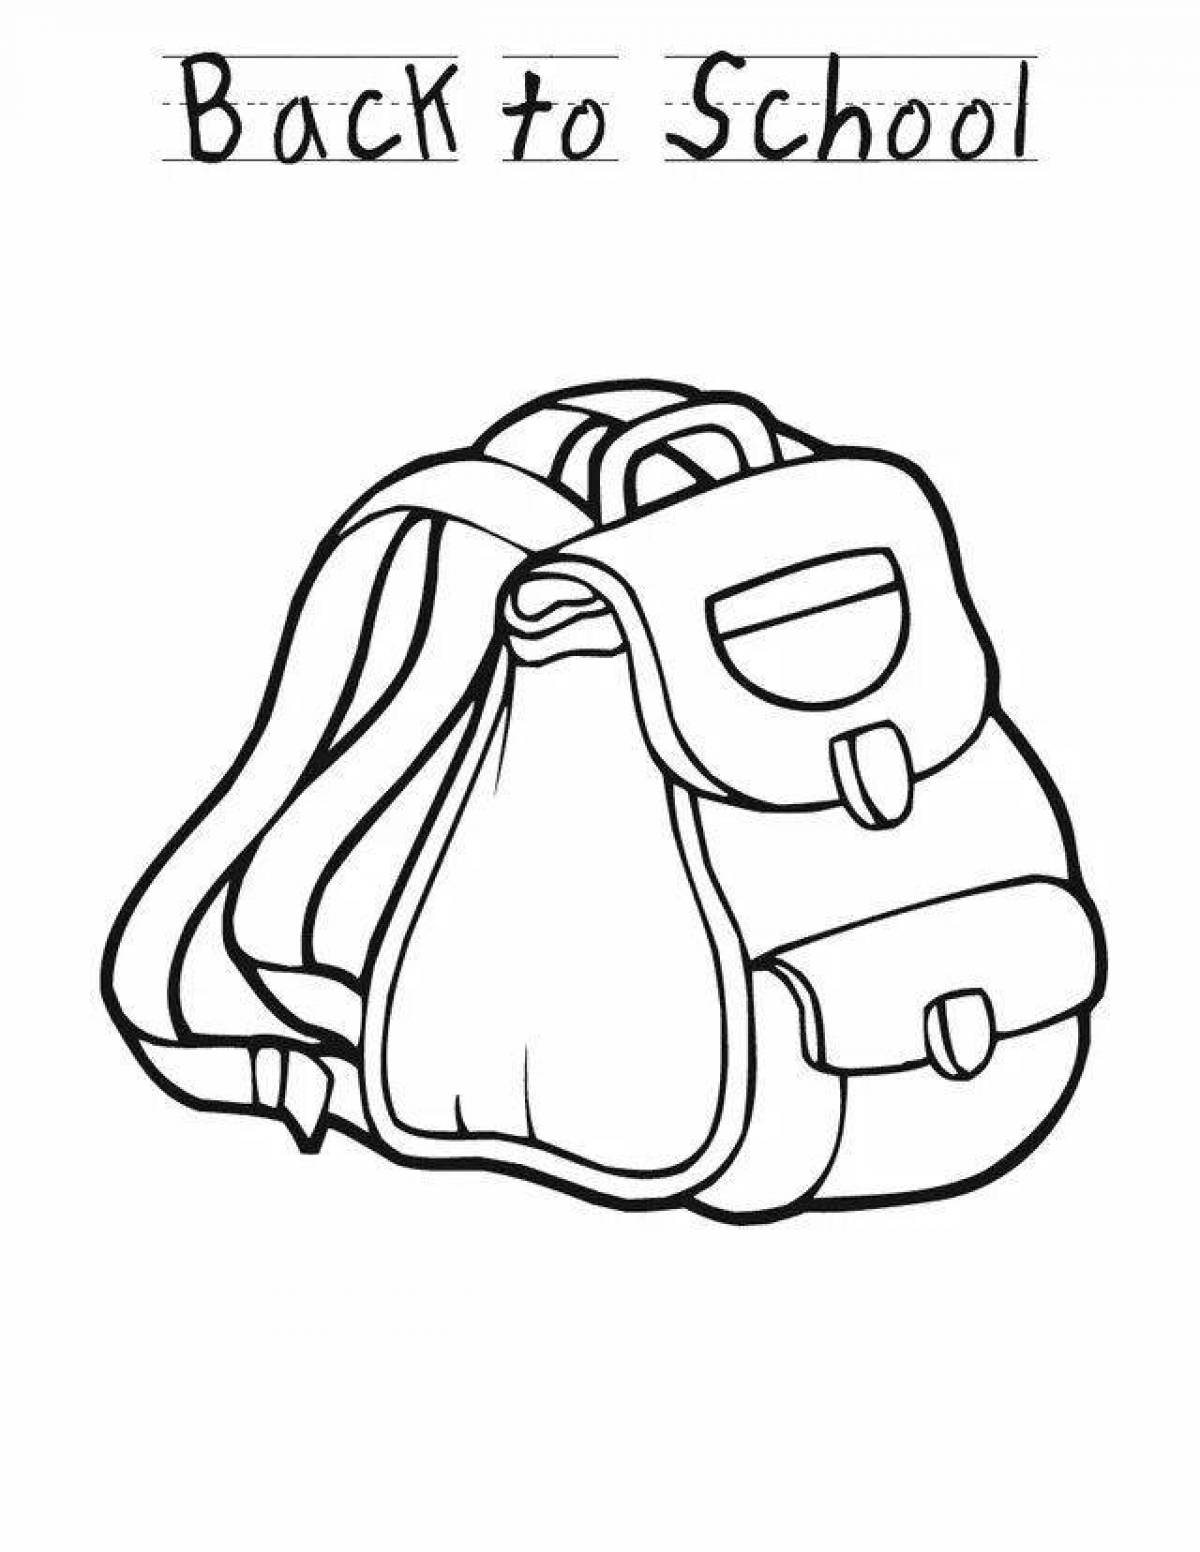 Colorful and bright backpack coloring book for children